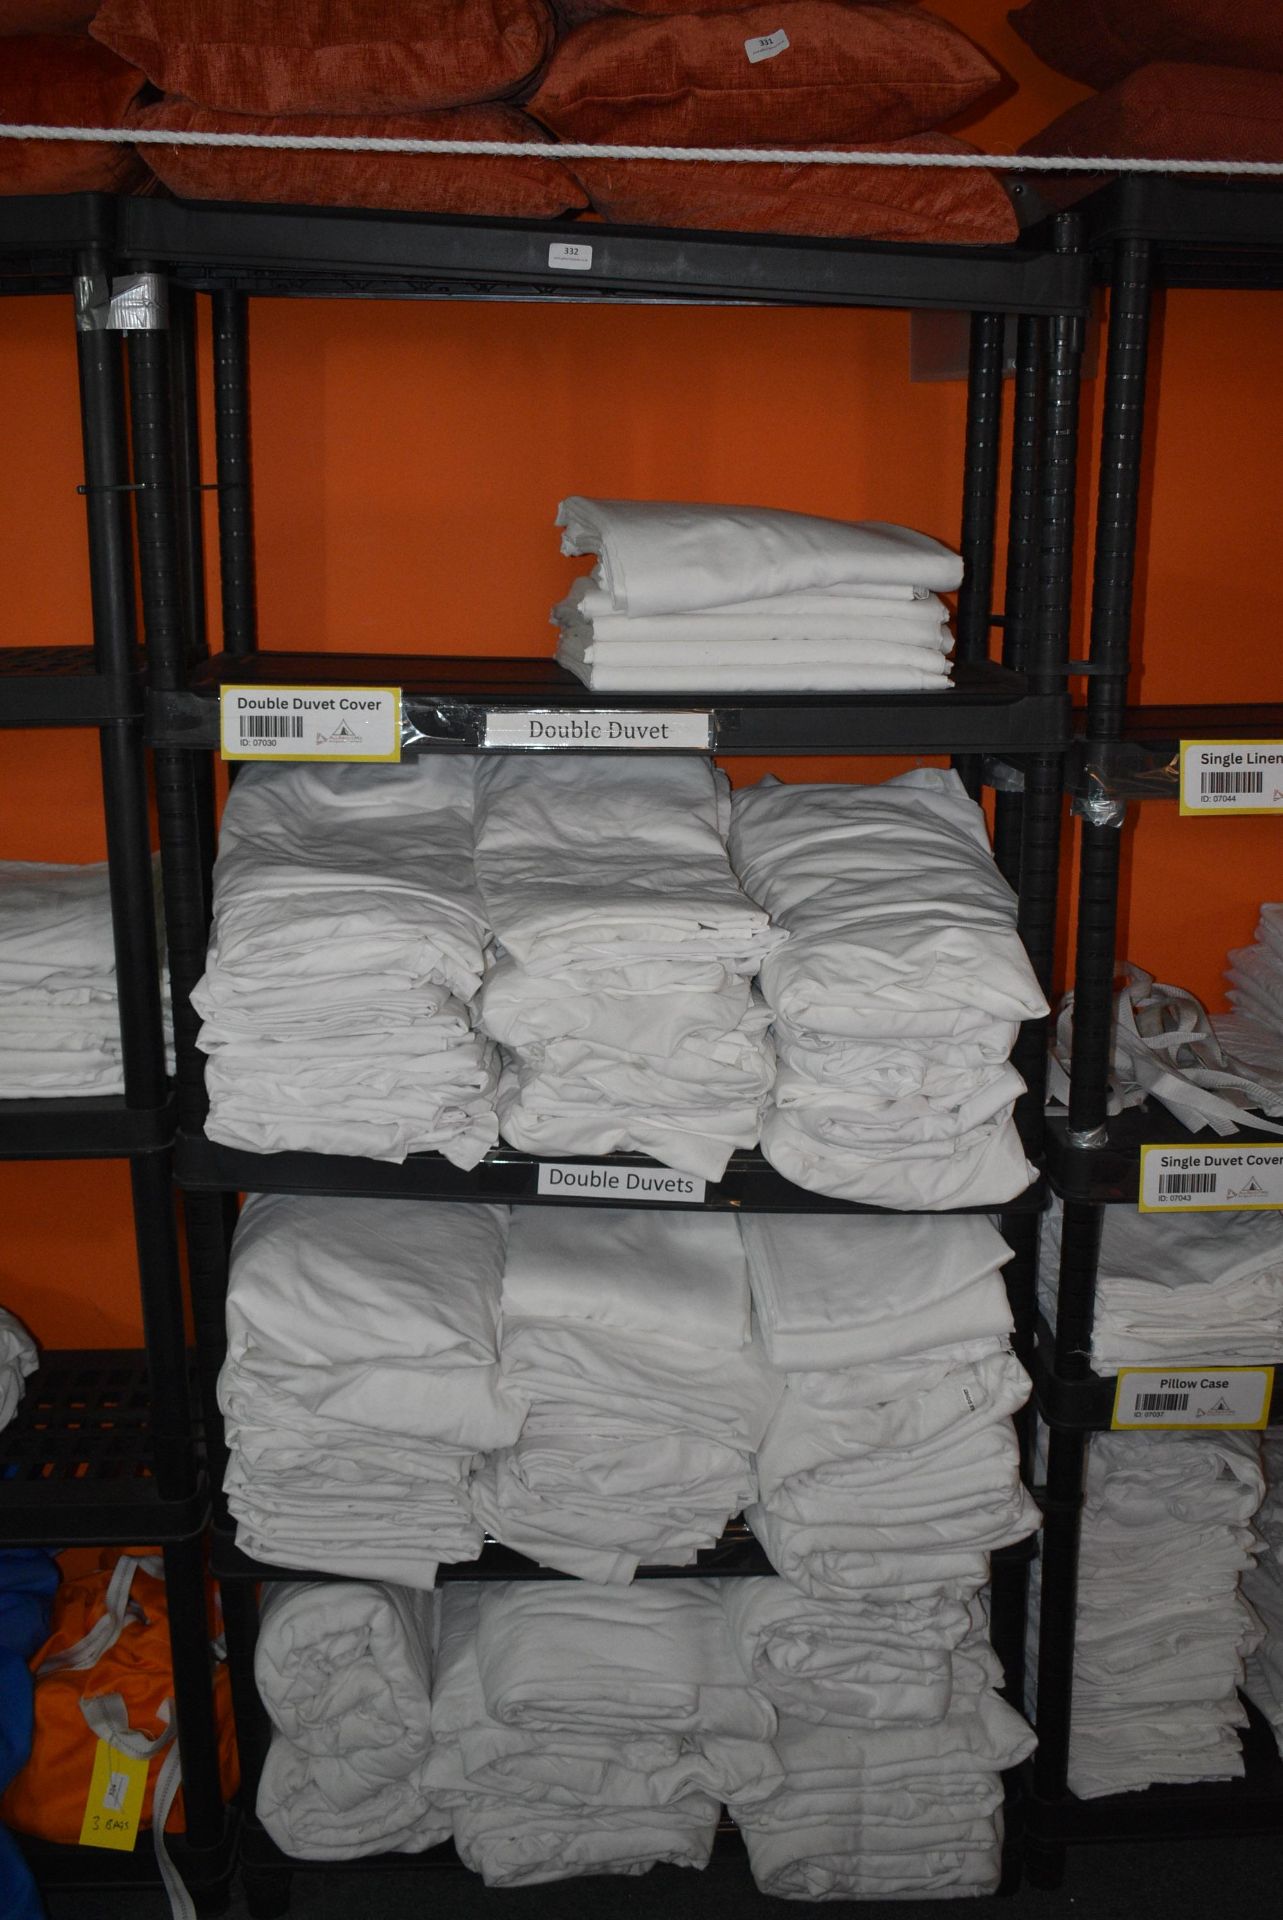 *Five Tier Plastic Shelving Unit Containing Double Sheets, and Double Duvets